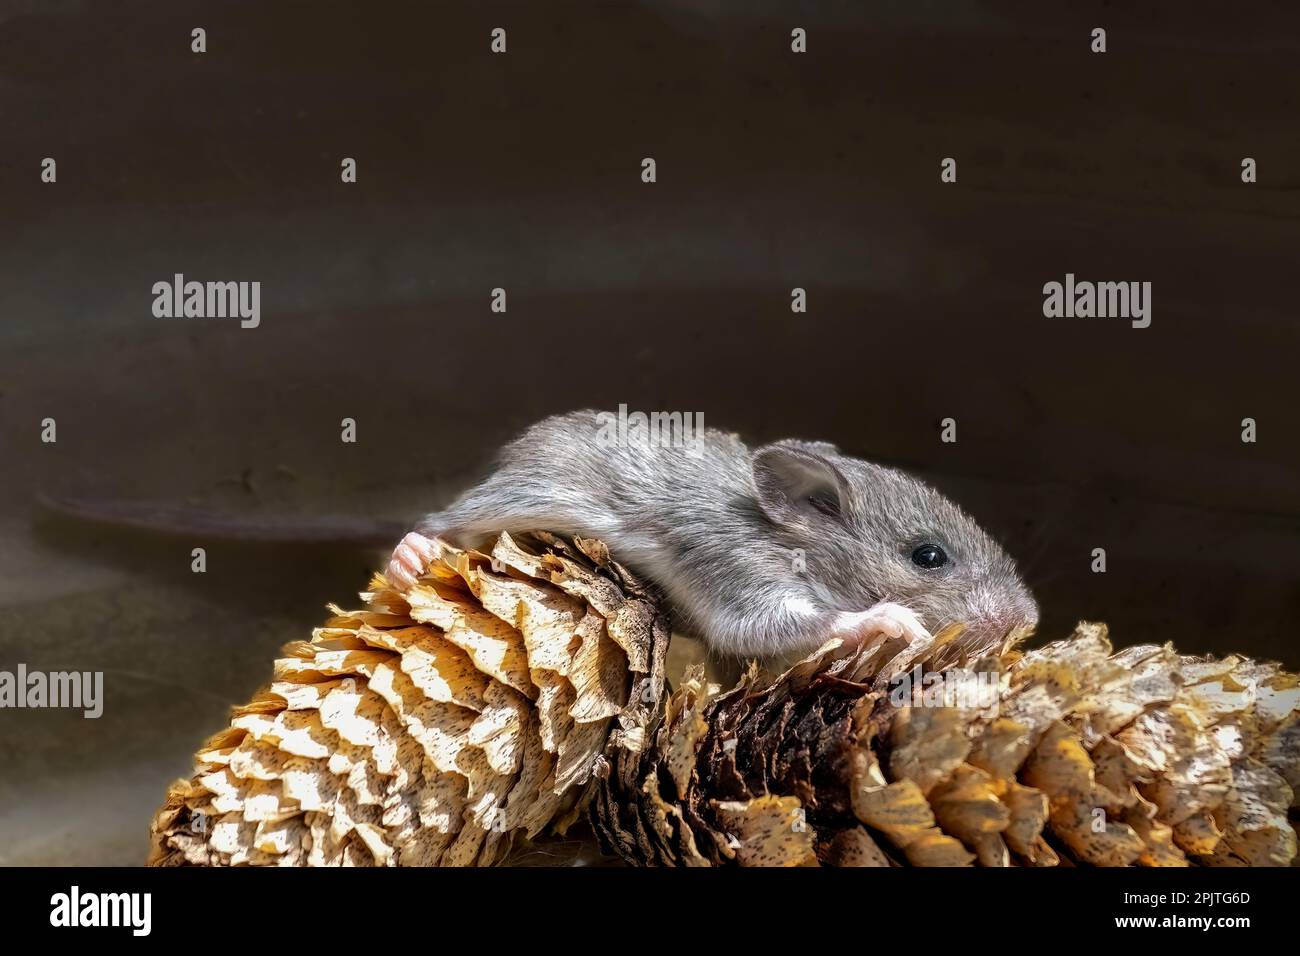 The house mouse (Mus musculusa) Few days old young house mouse. Stock Photo